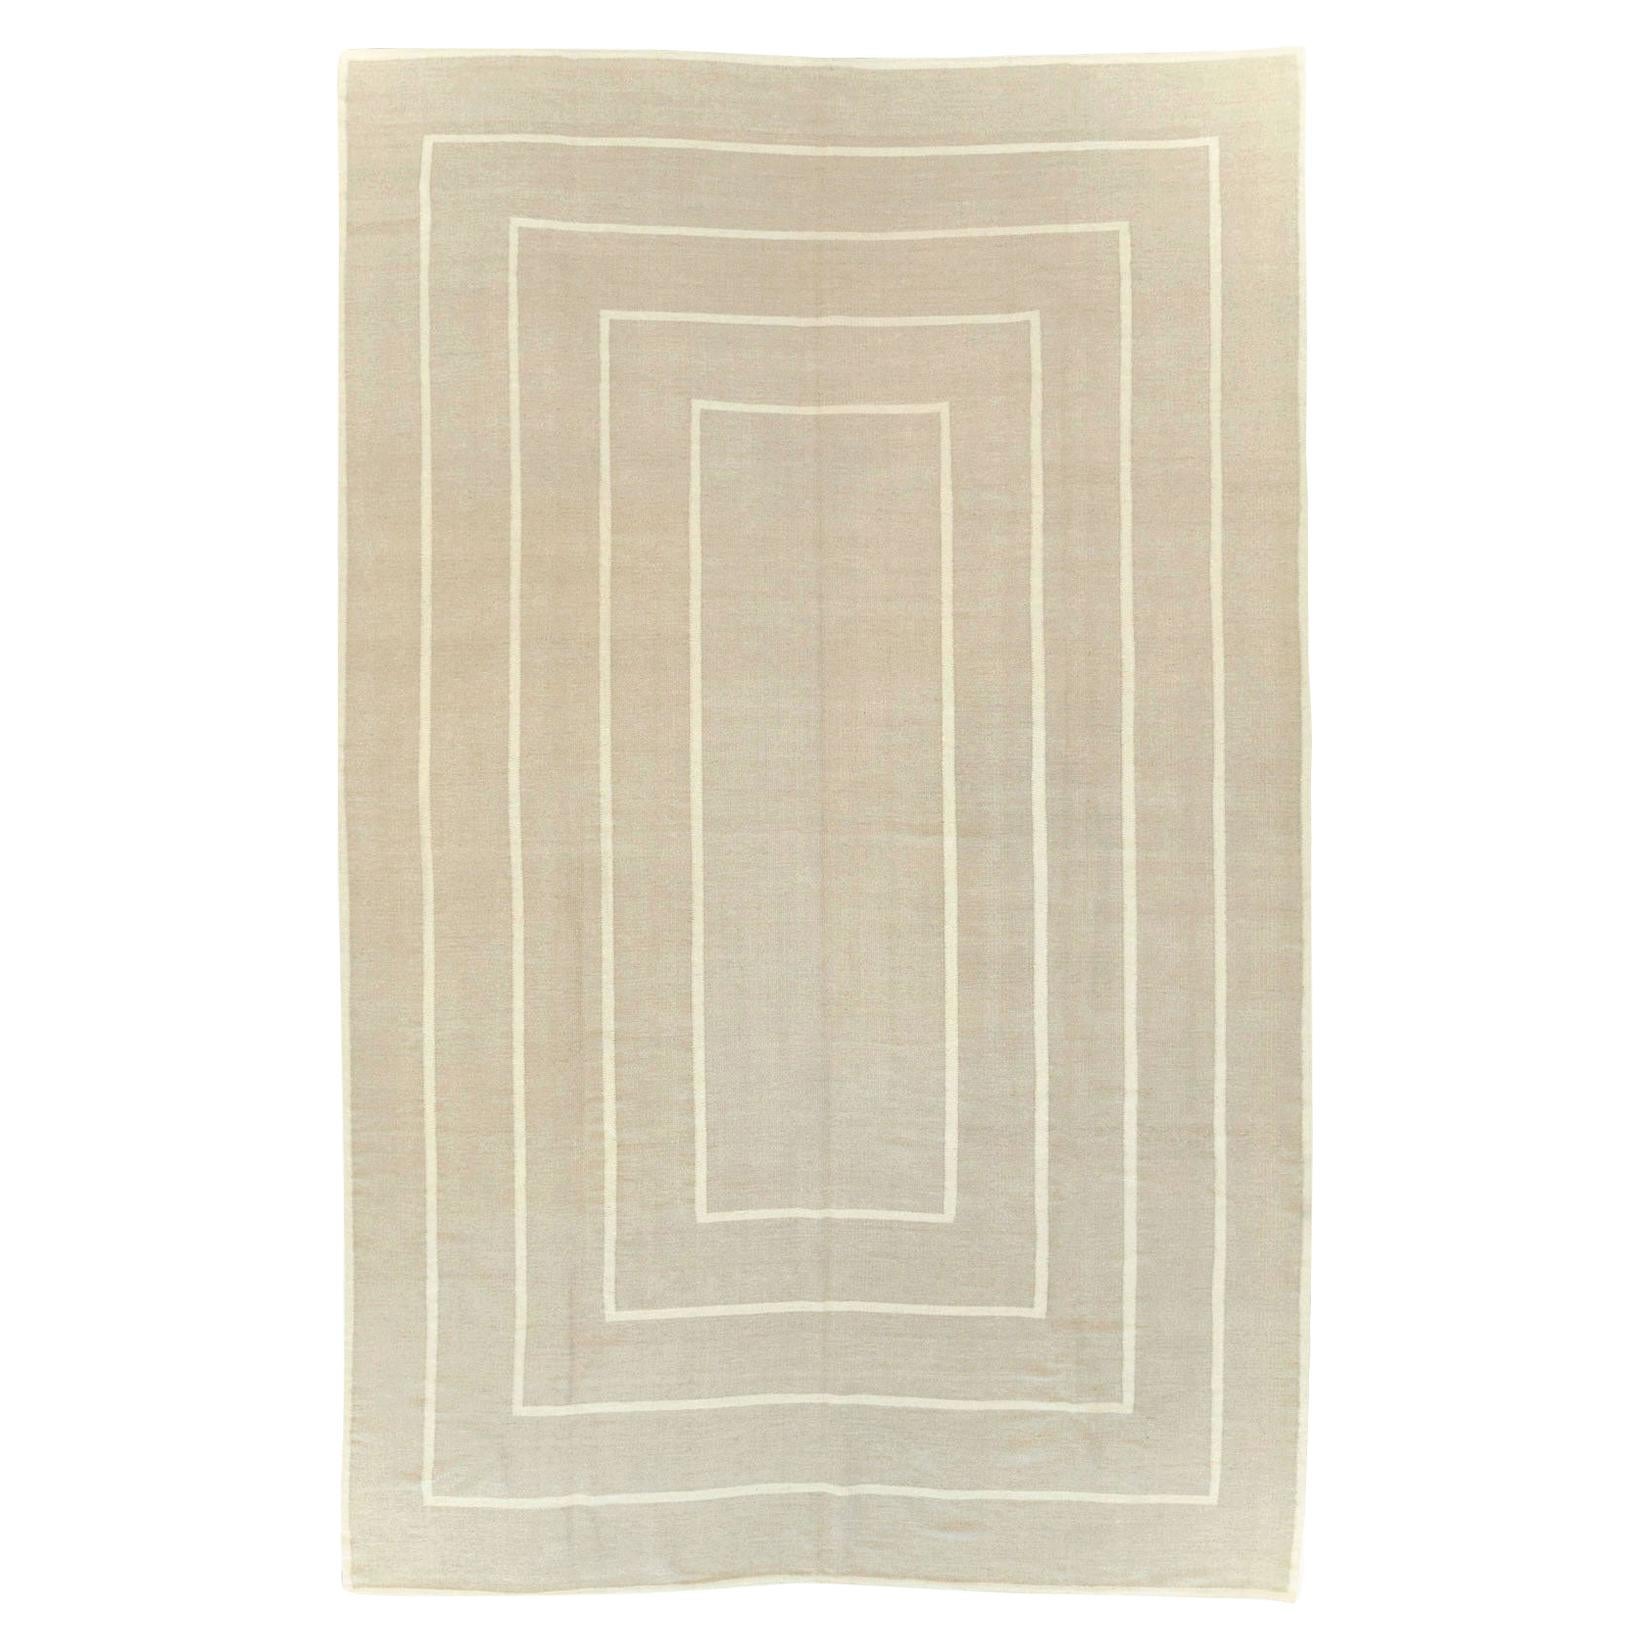 Contemporary Turkish Flatweave Large Room Size Carpet in Beige and Cream